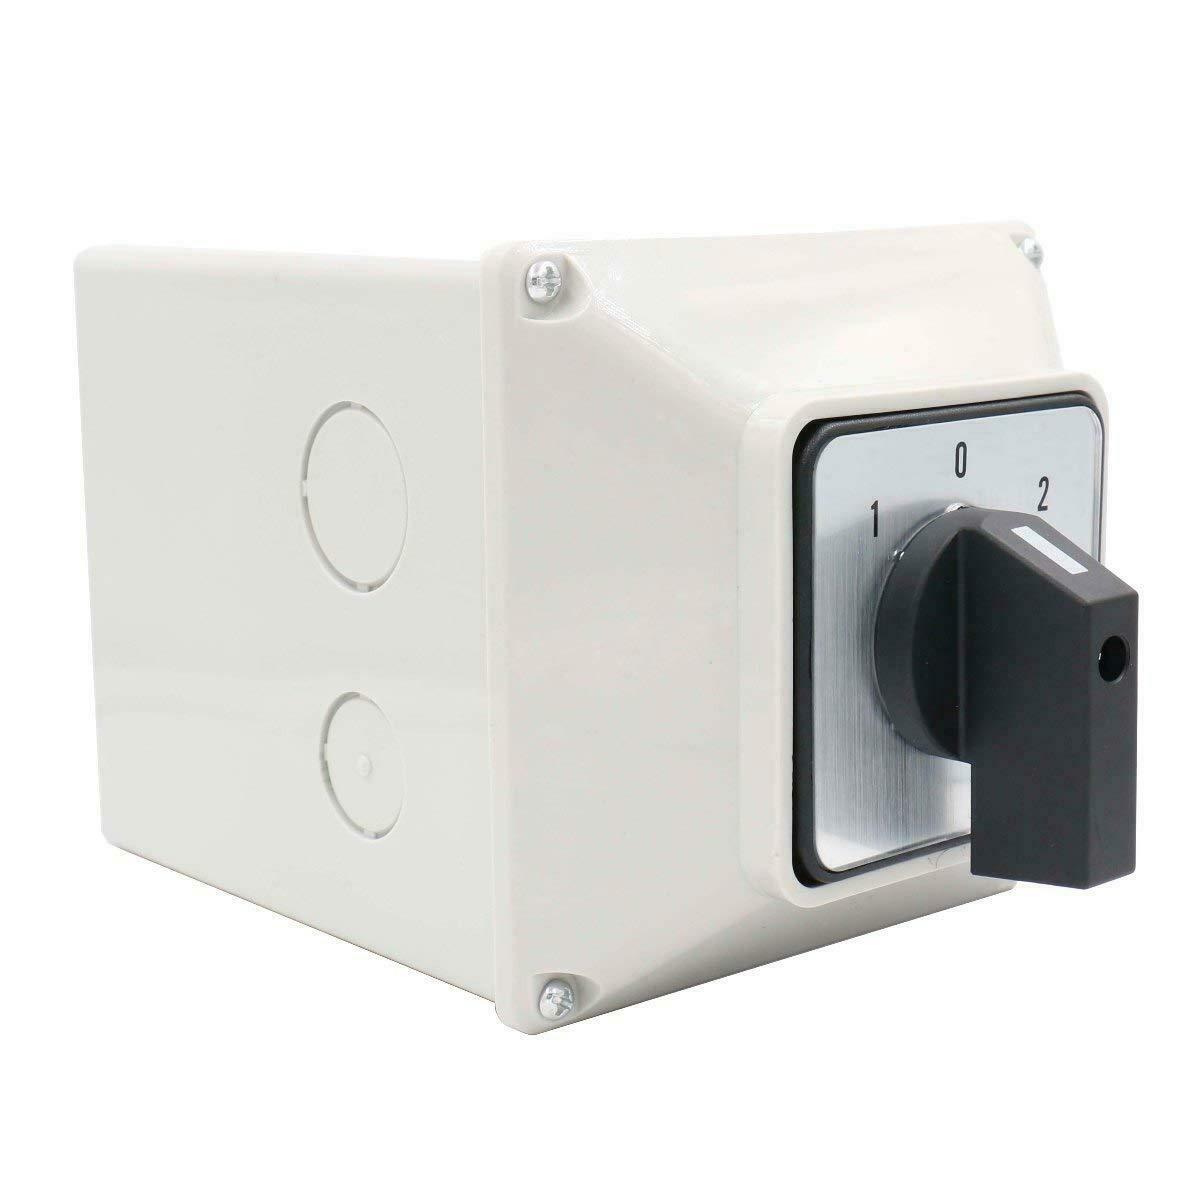 Baomain Universal Rotary Changeover Switch SZW26-63/D303.3 with Master Switch 3 Pole 660V  63A 12 screw terminals
3 Positions